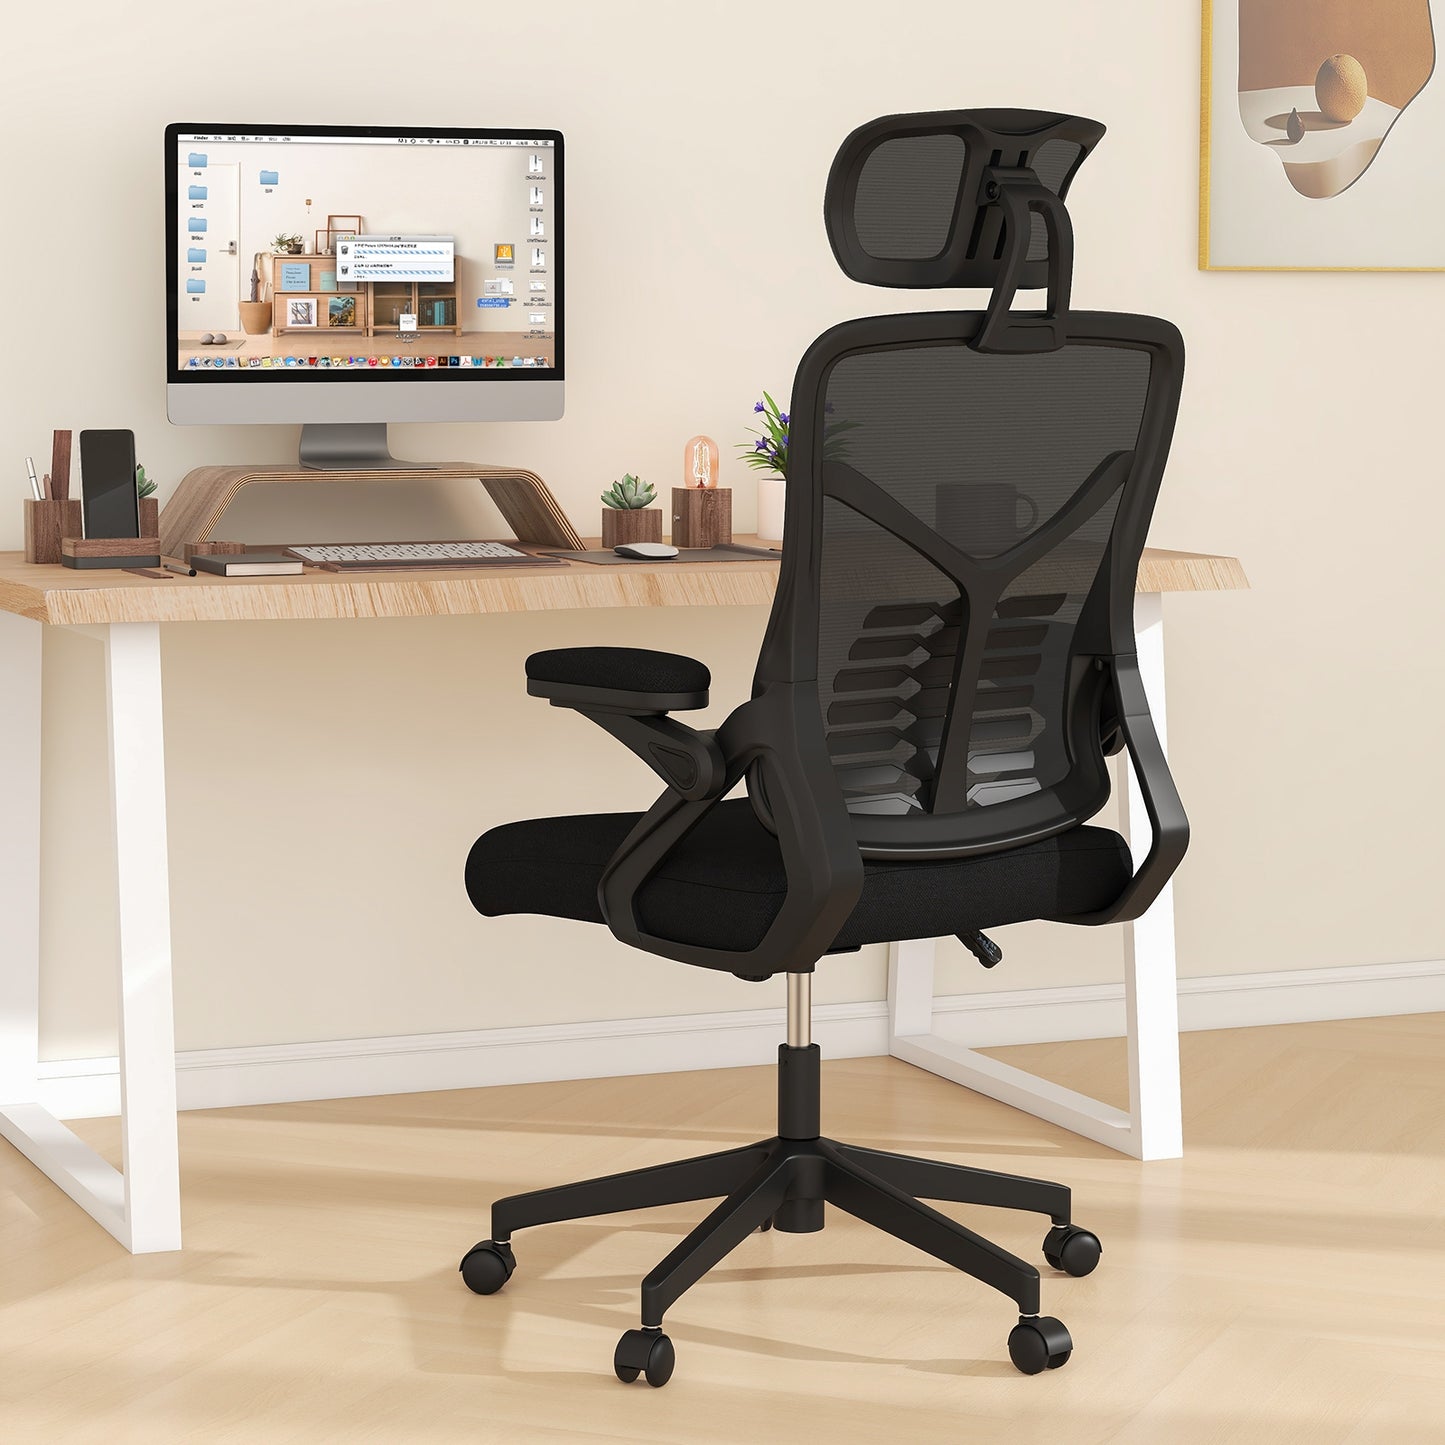 Ergonomic Mesh Office Chair with Lumbar Support and Rocking Function-Black